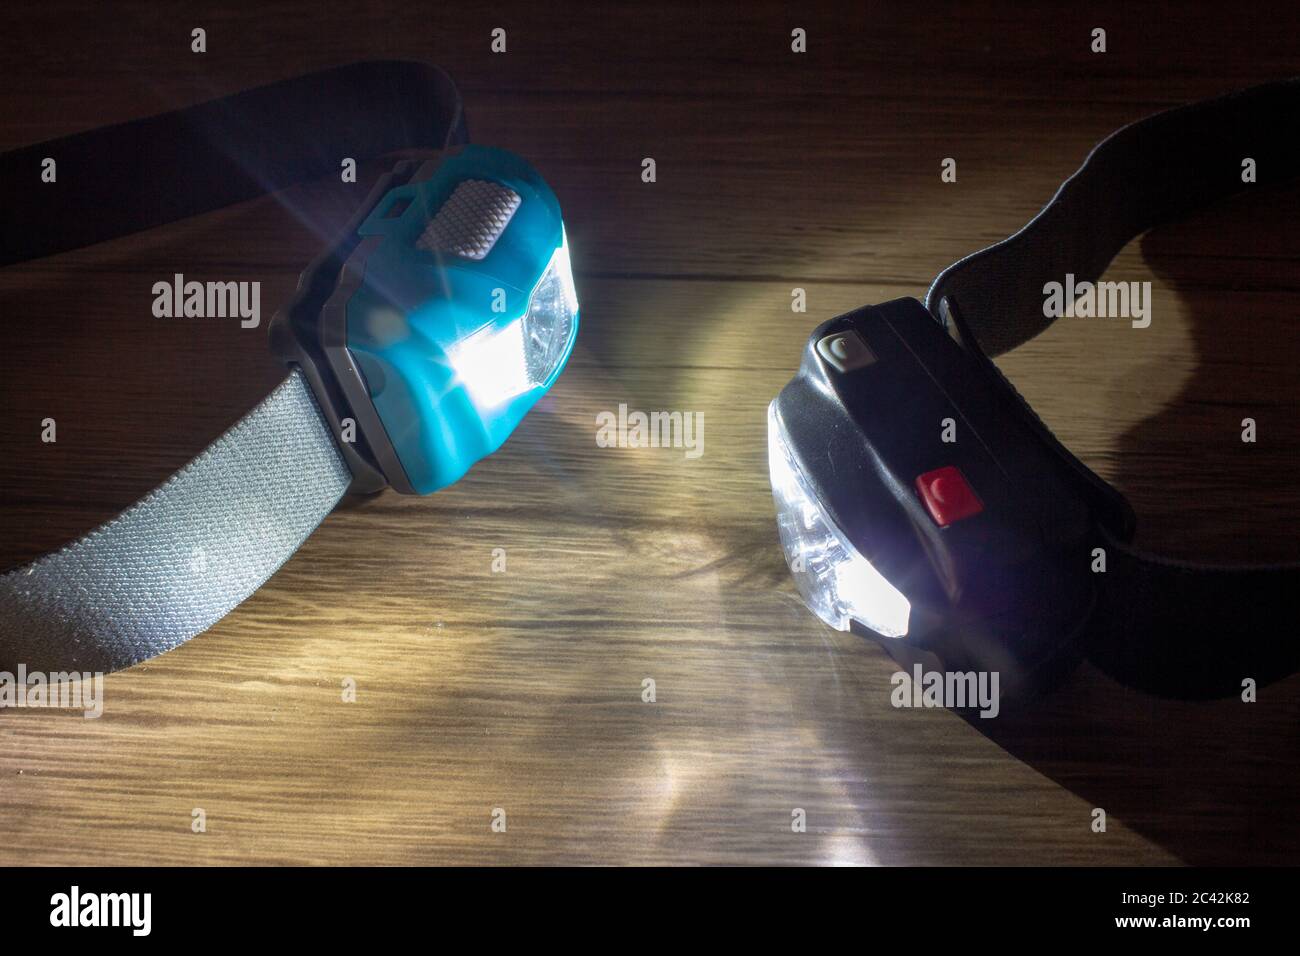 A pair of led headlamps turned on facing each other showing the light beams Stock Photo